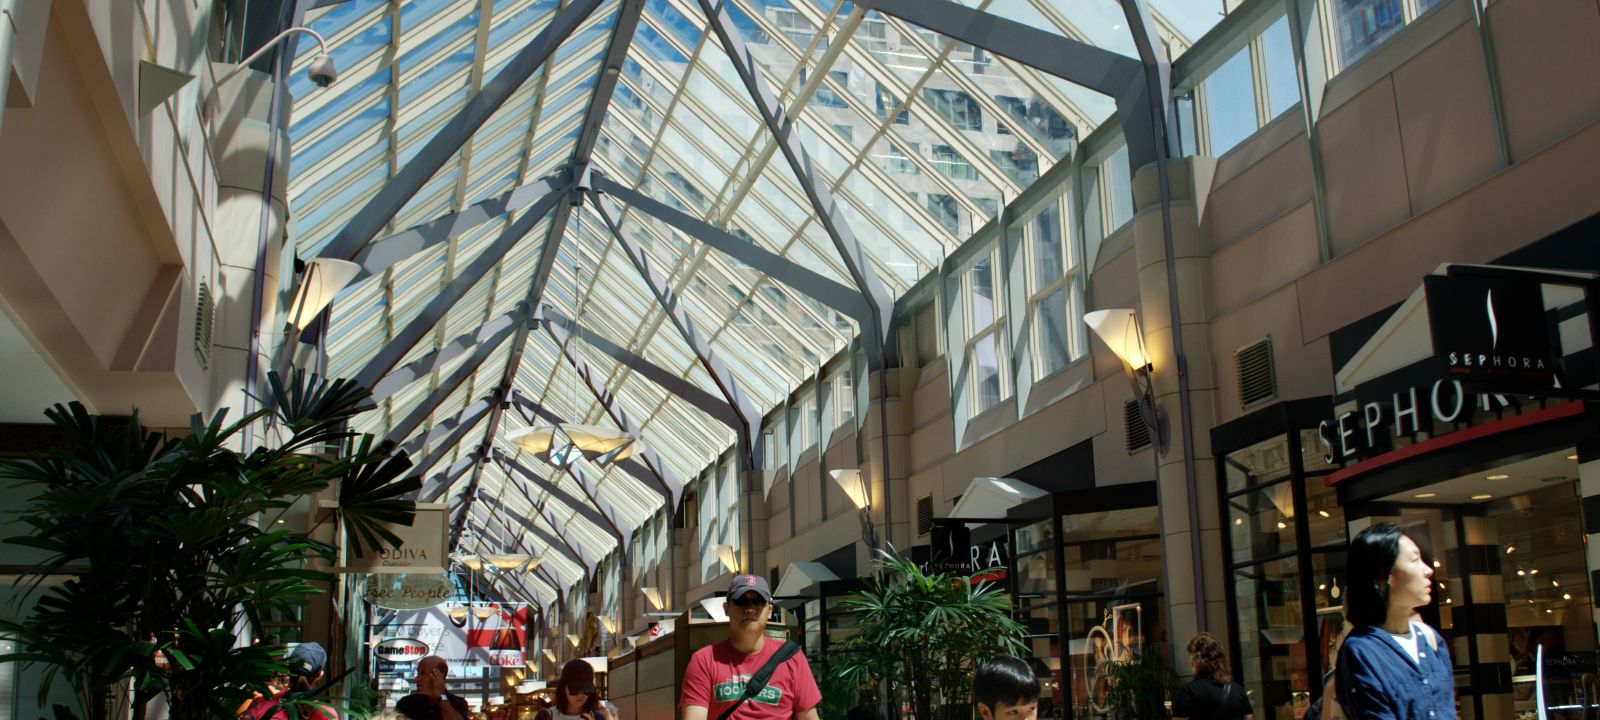 Interior of Prudential Shopping Center